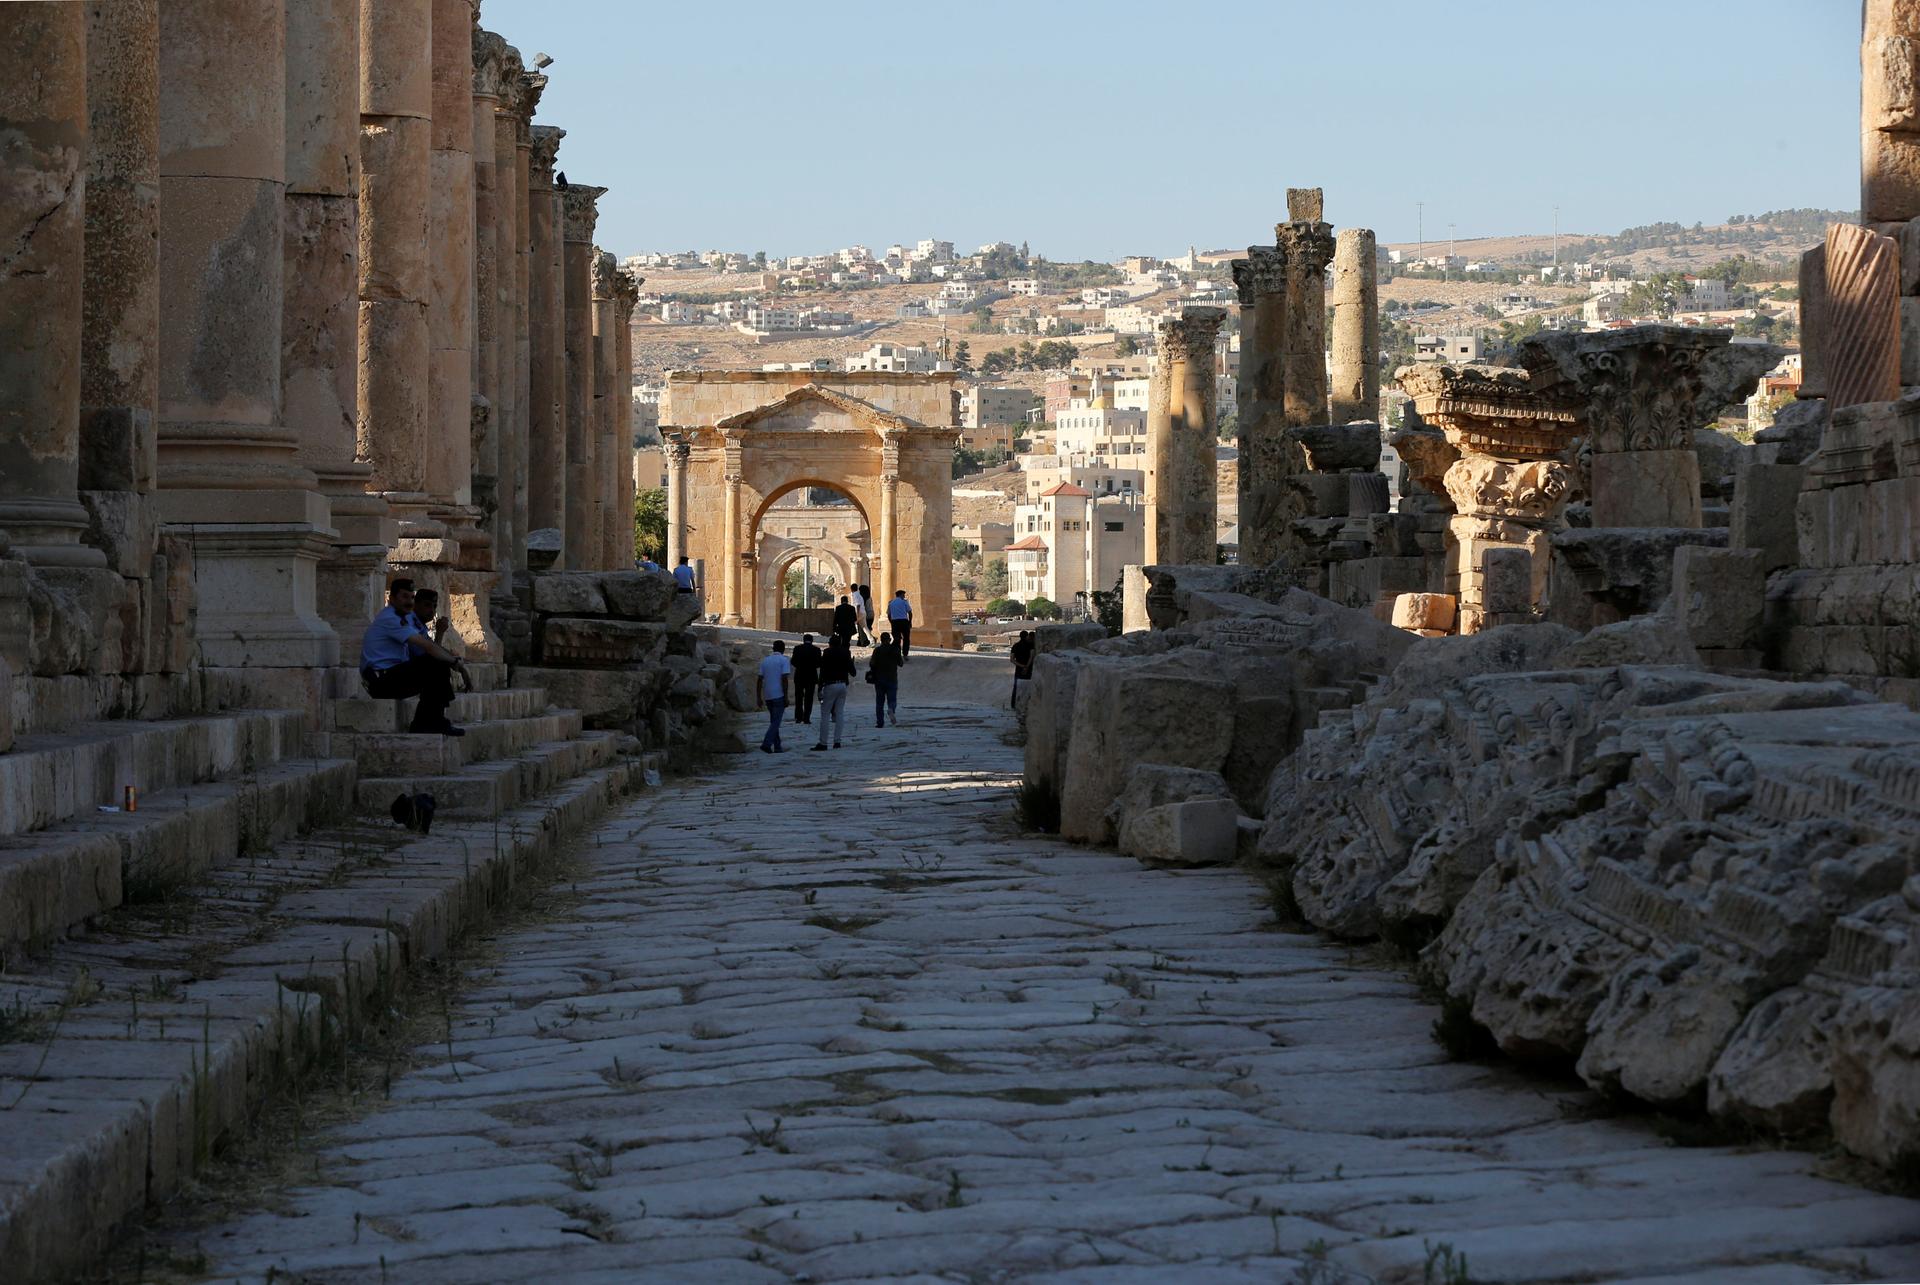 People walk along the ruins of the ancient Roman city of Jerash